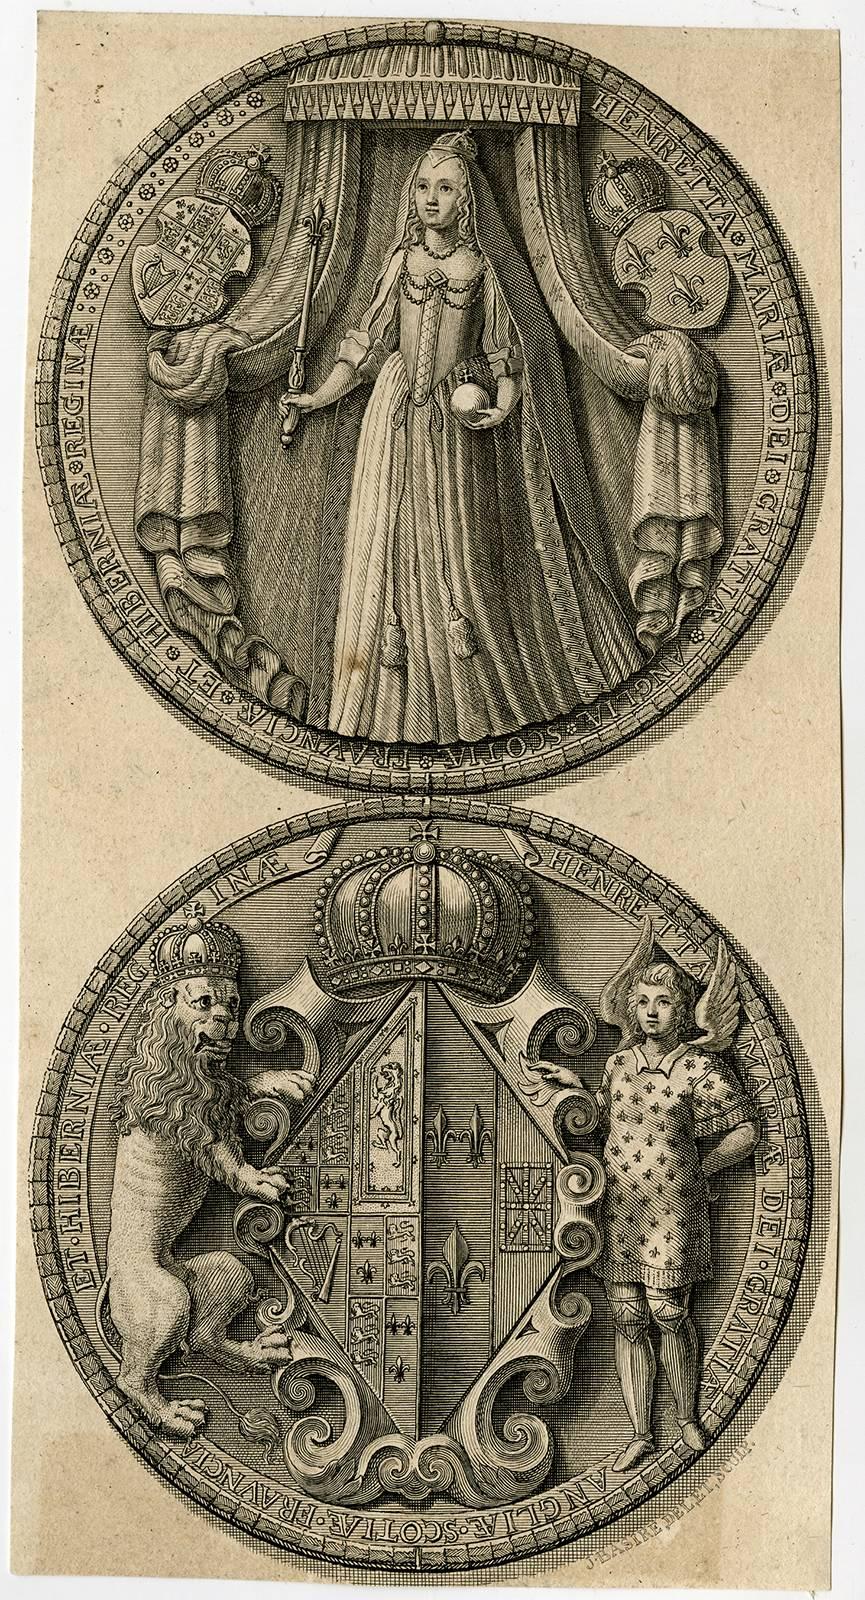 Unknown Figurative Print - Collection of four print with depictions of English royal seals. 